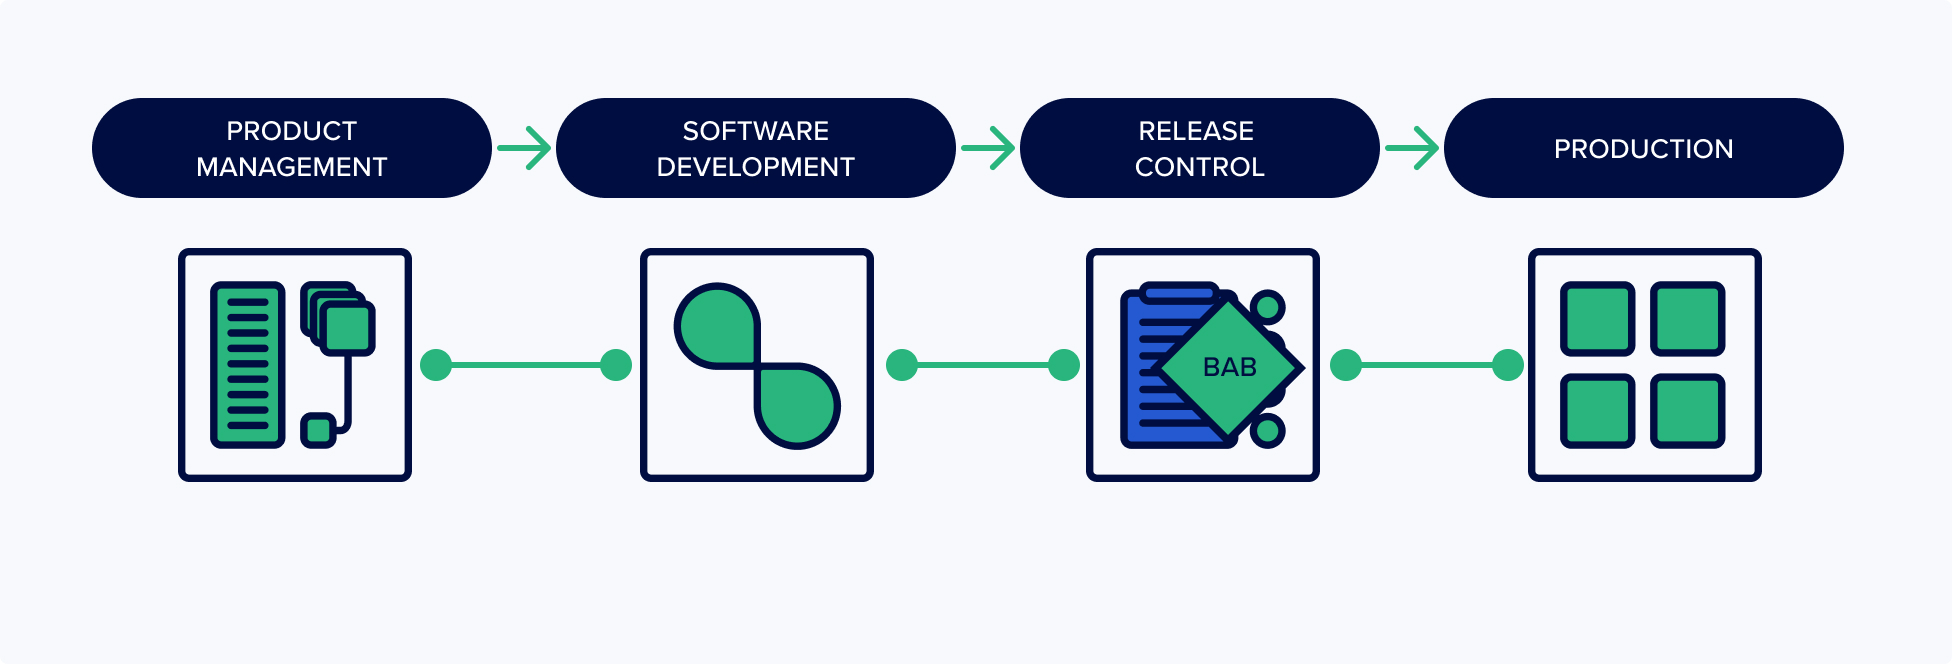 software production process